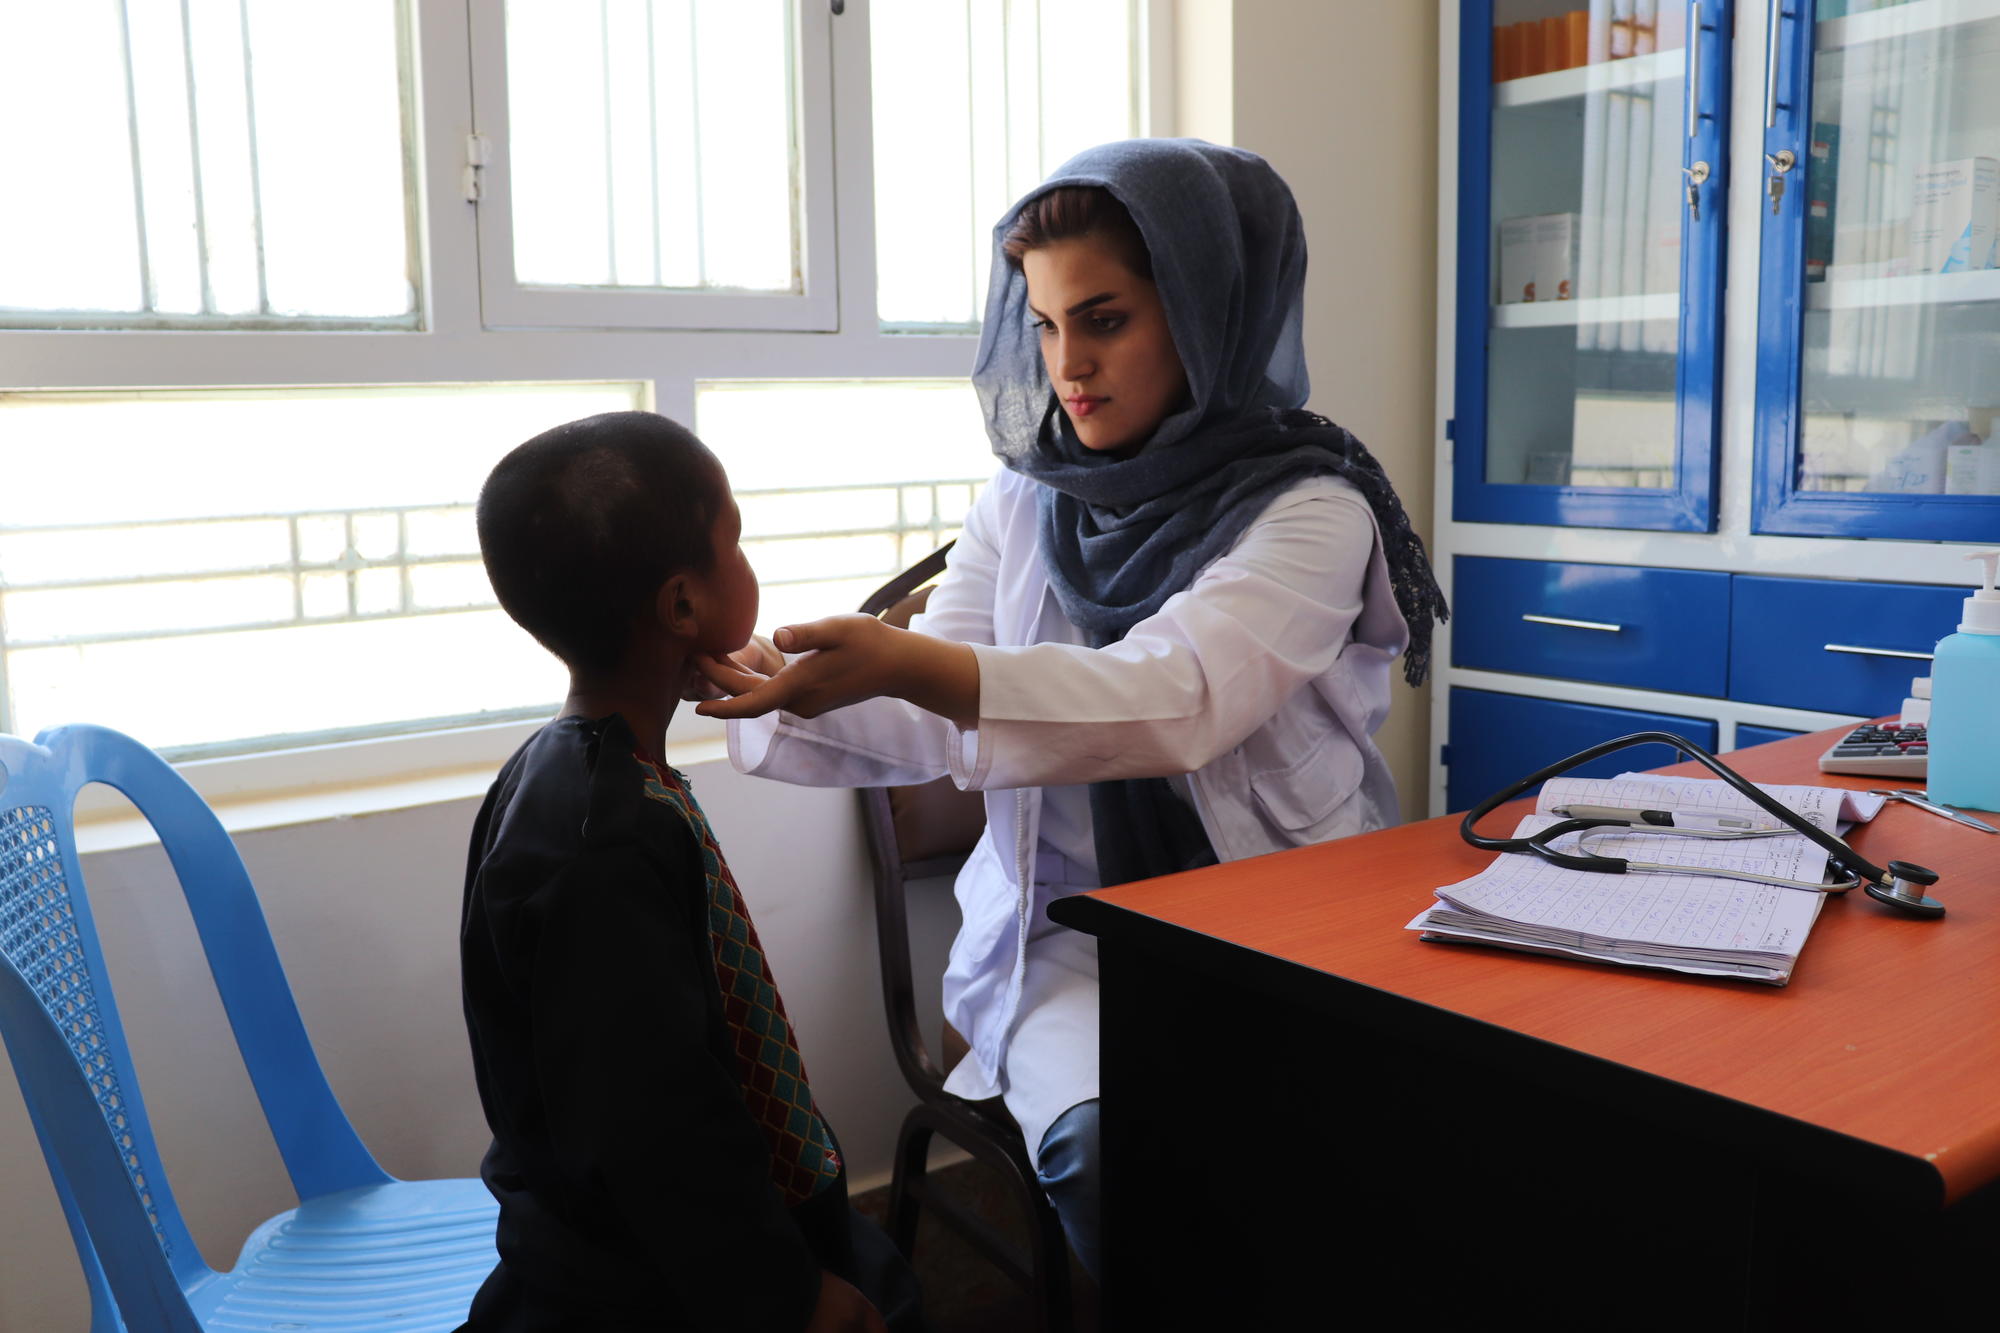 Report: Reality check Afghanistans neglected healthcare crisis | MSF - Médecins Sans Frontières (MSF) International